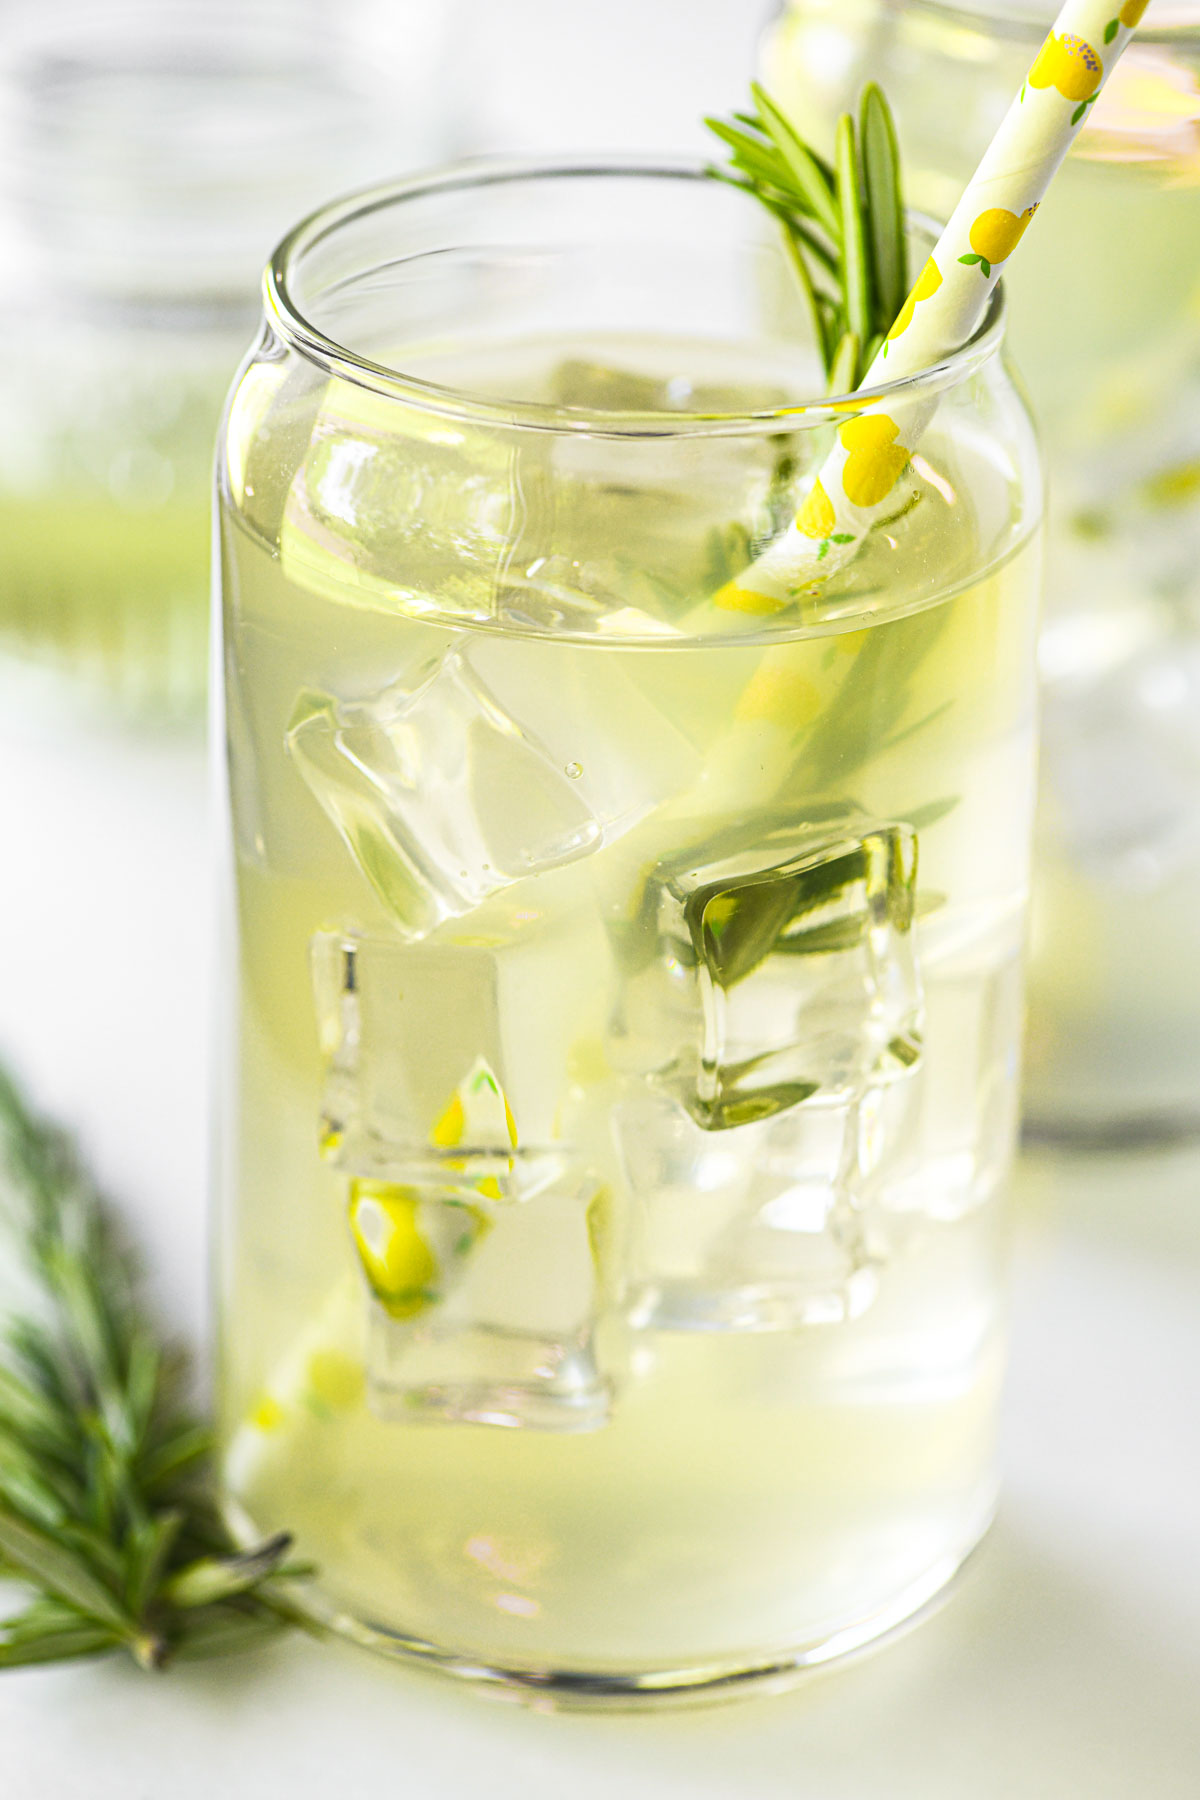 A glass of rosemary lemonade with sprigs of fresh rosemary.